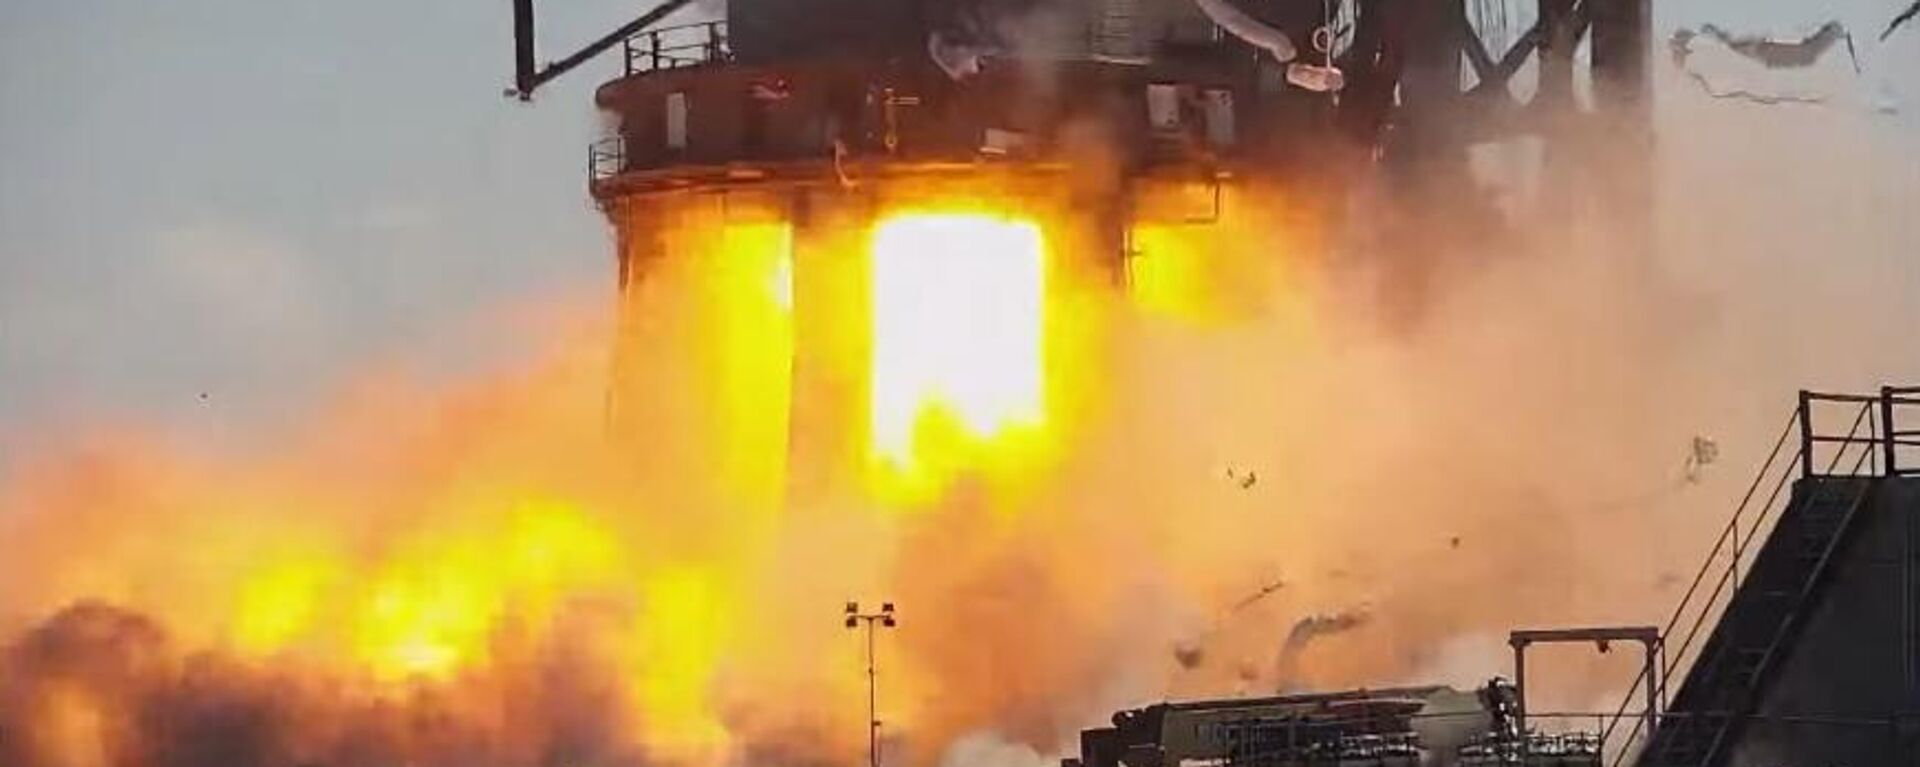 SpaceX Tests Super Heavy Booster 7, Results in Explosion and Pad Fire - Sputnik International, 1920, 08.09.2023